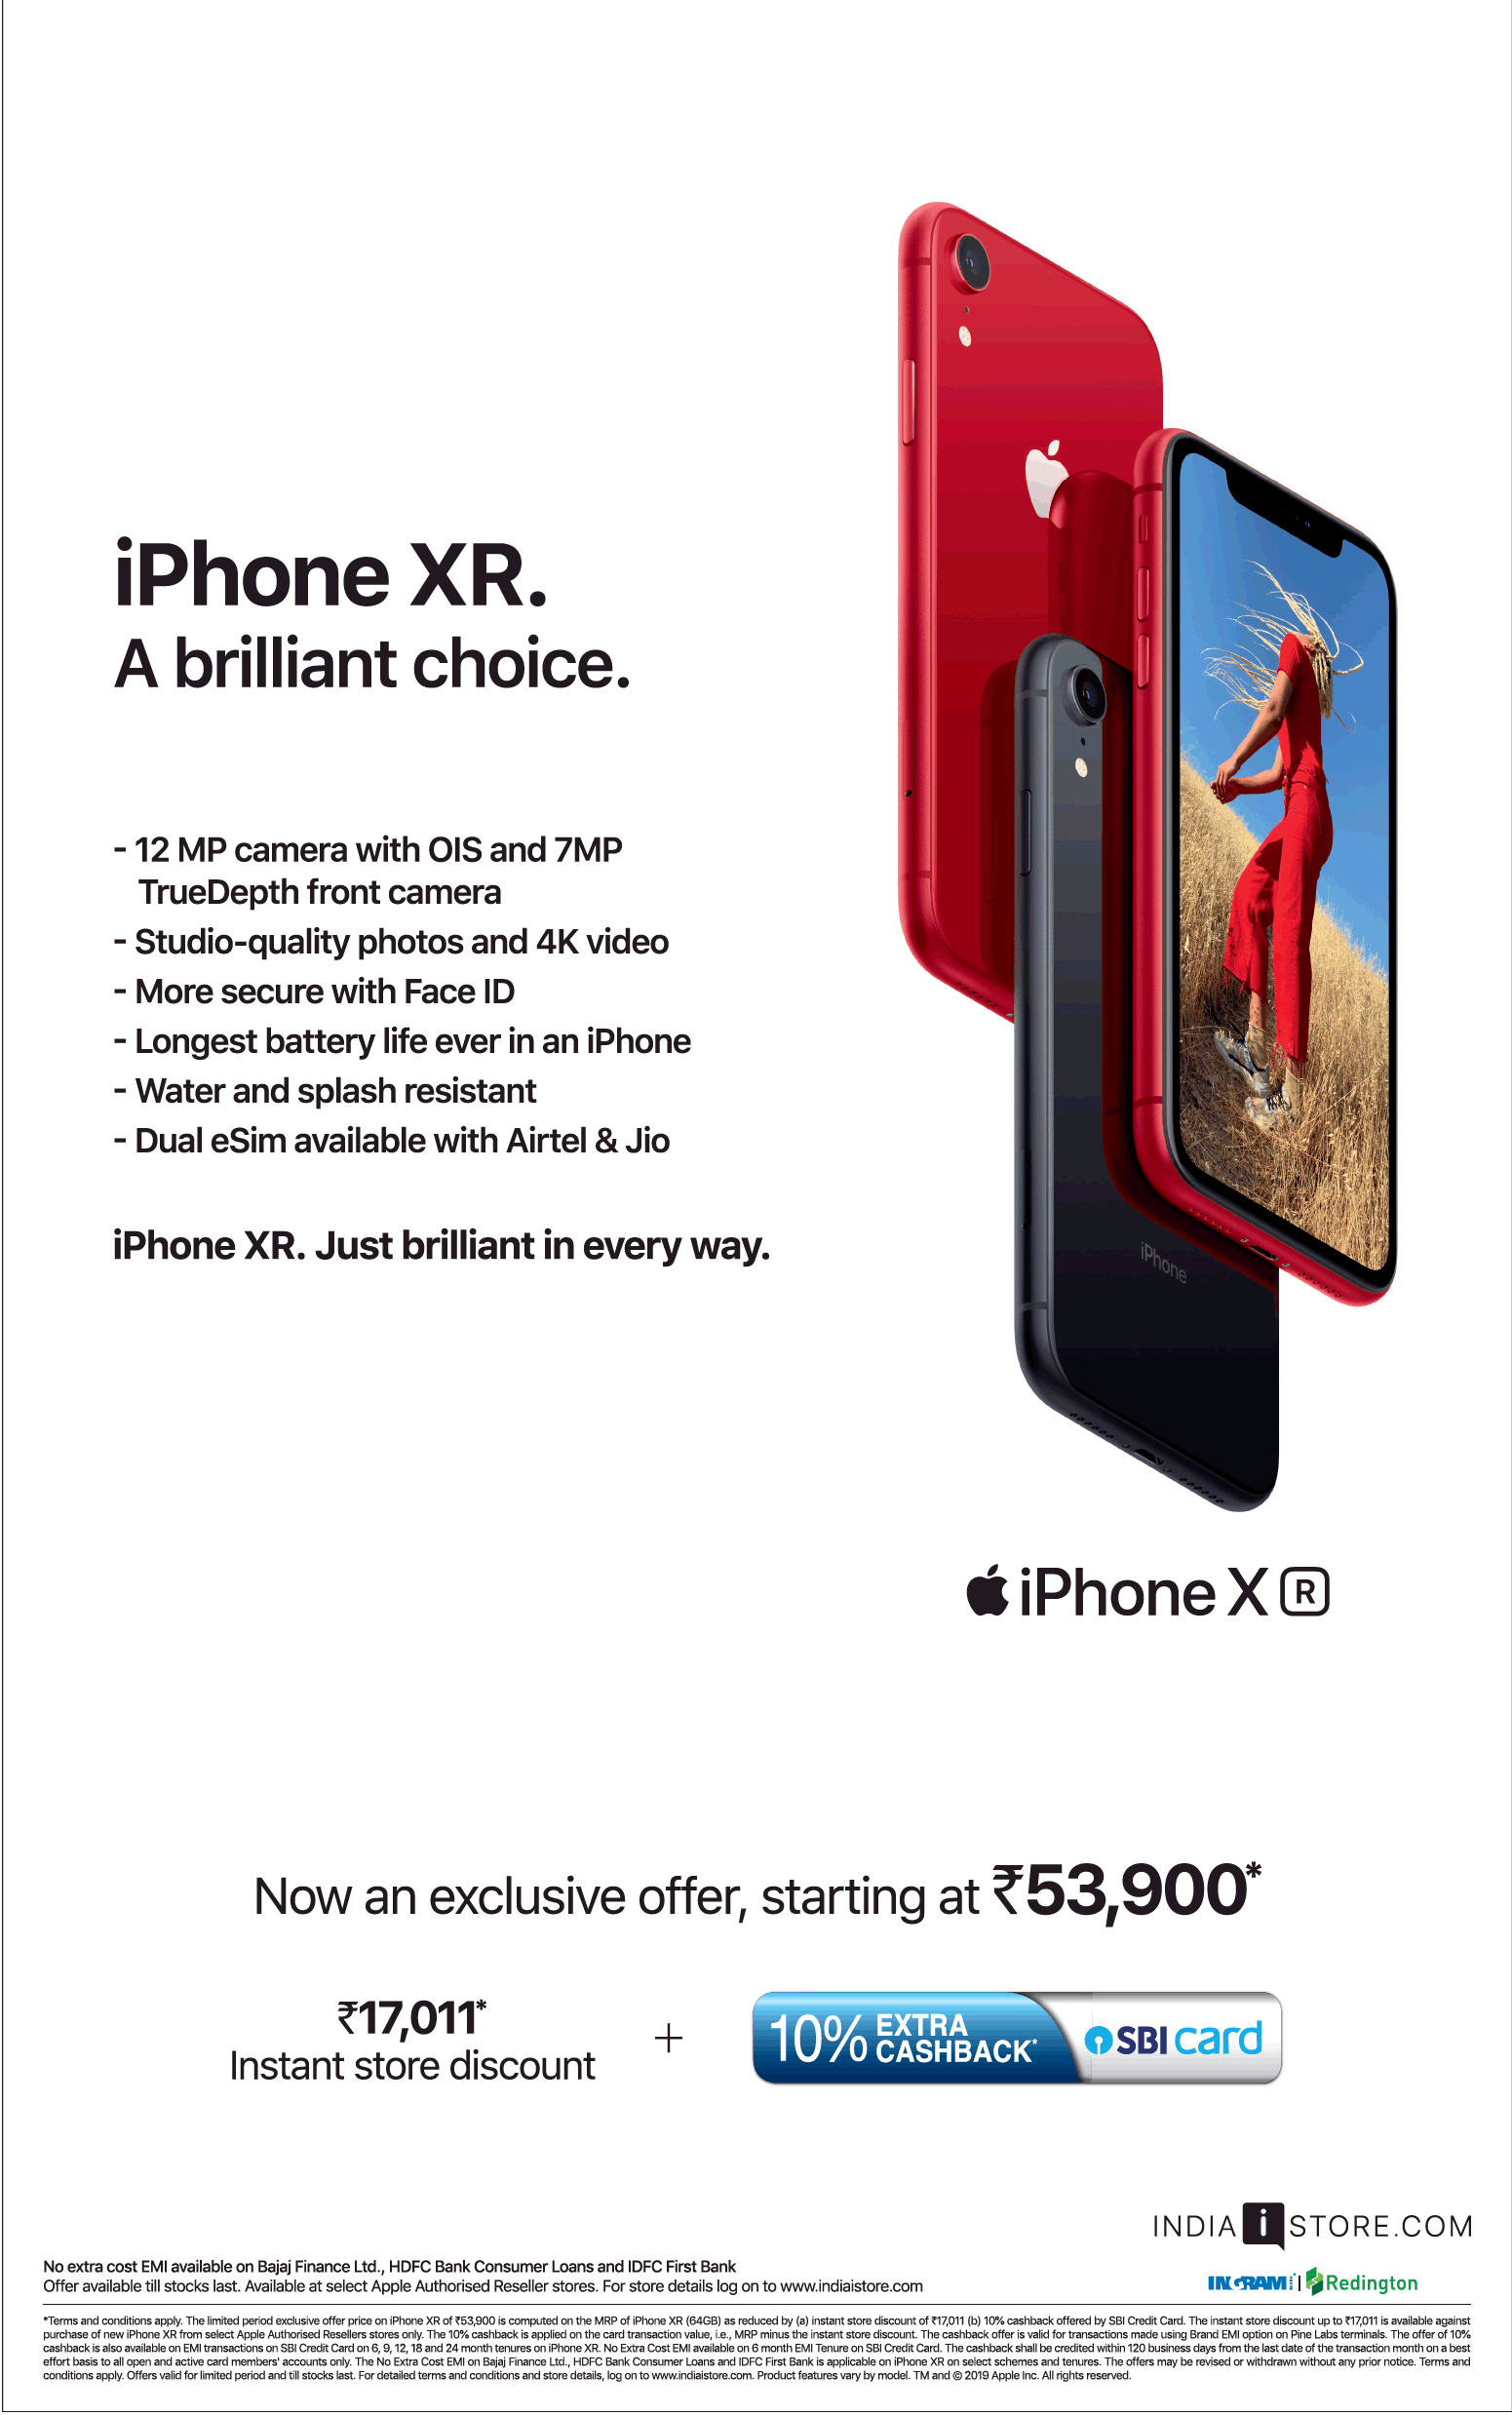 iphone-xr-a-brilliant-choice-now-an-exclusive-offer-starting-at-rs-53900-ad-delhi-times-19-07-2019.png